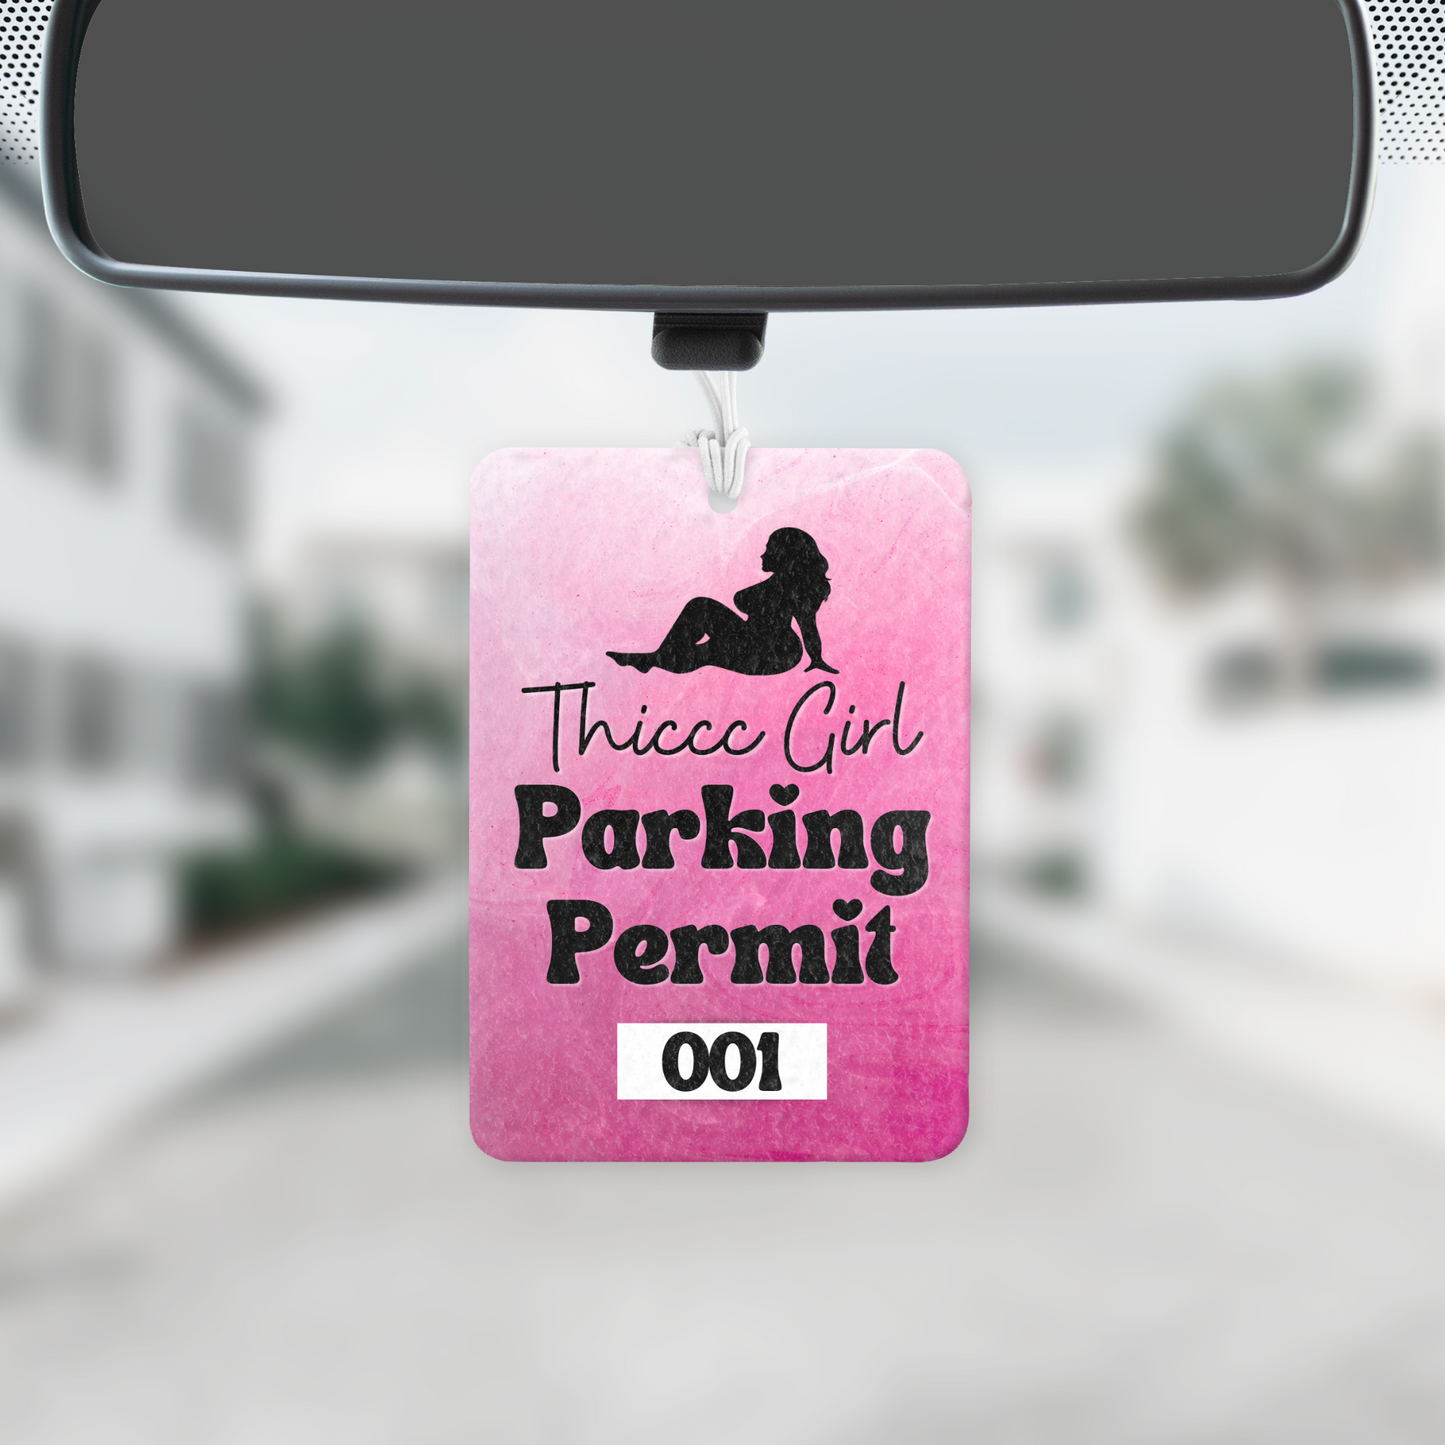 Thiccc Girl Parking Permit Air Freshie